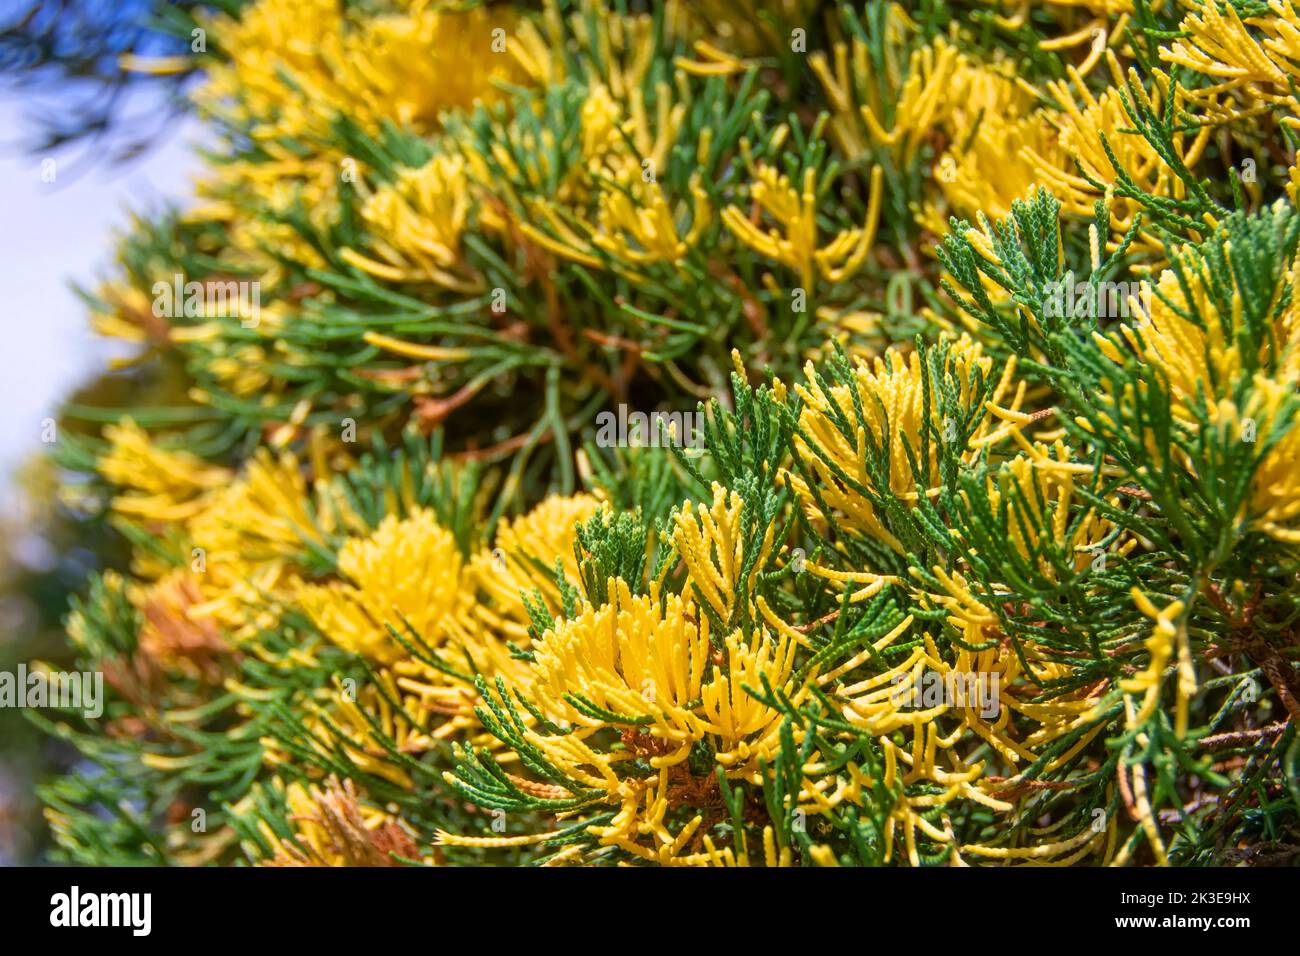 Variegated stems and leaves of coniferous trees close up Stock Photo